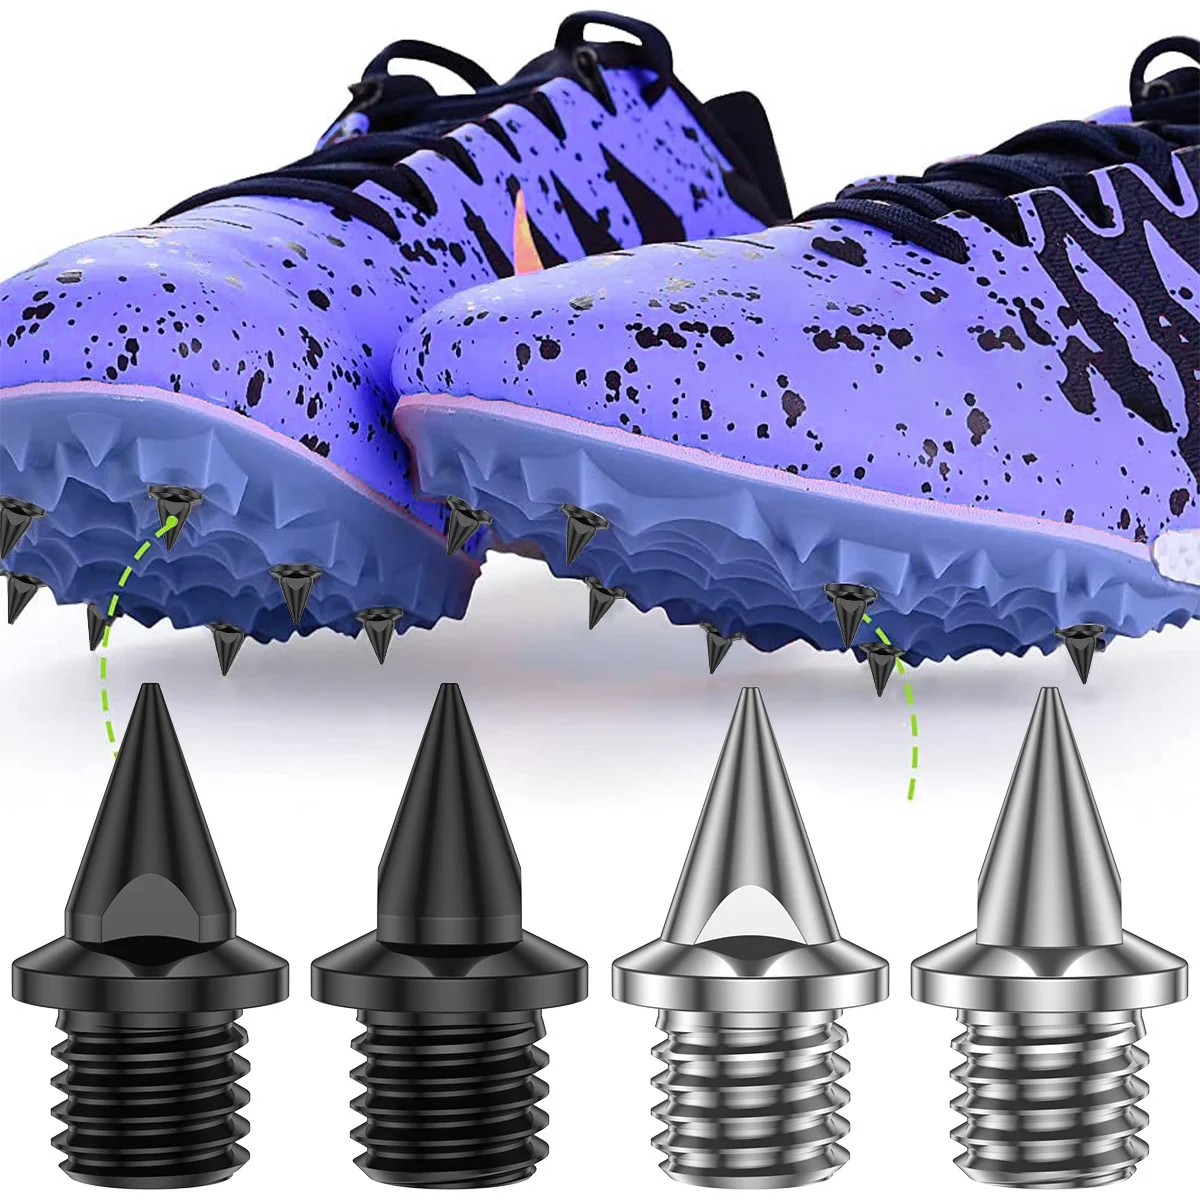 100Pcs Track Spikes Steel Wear Resistant Shoe Spikes Replacement Non-slip Lightweight Sport Shoes Spikes for Running Hiking